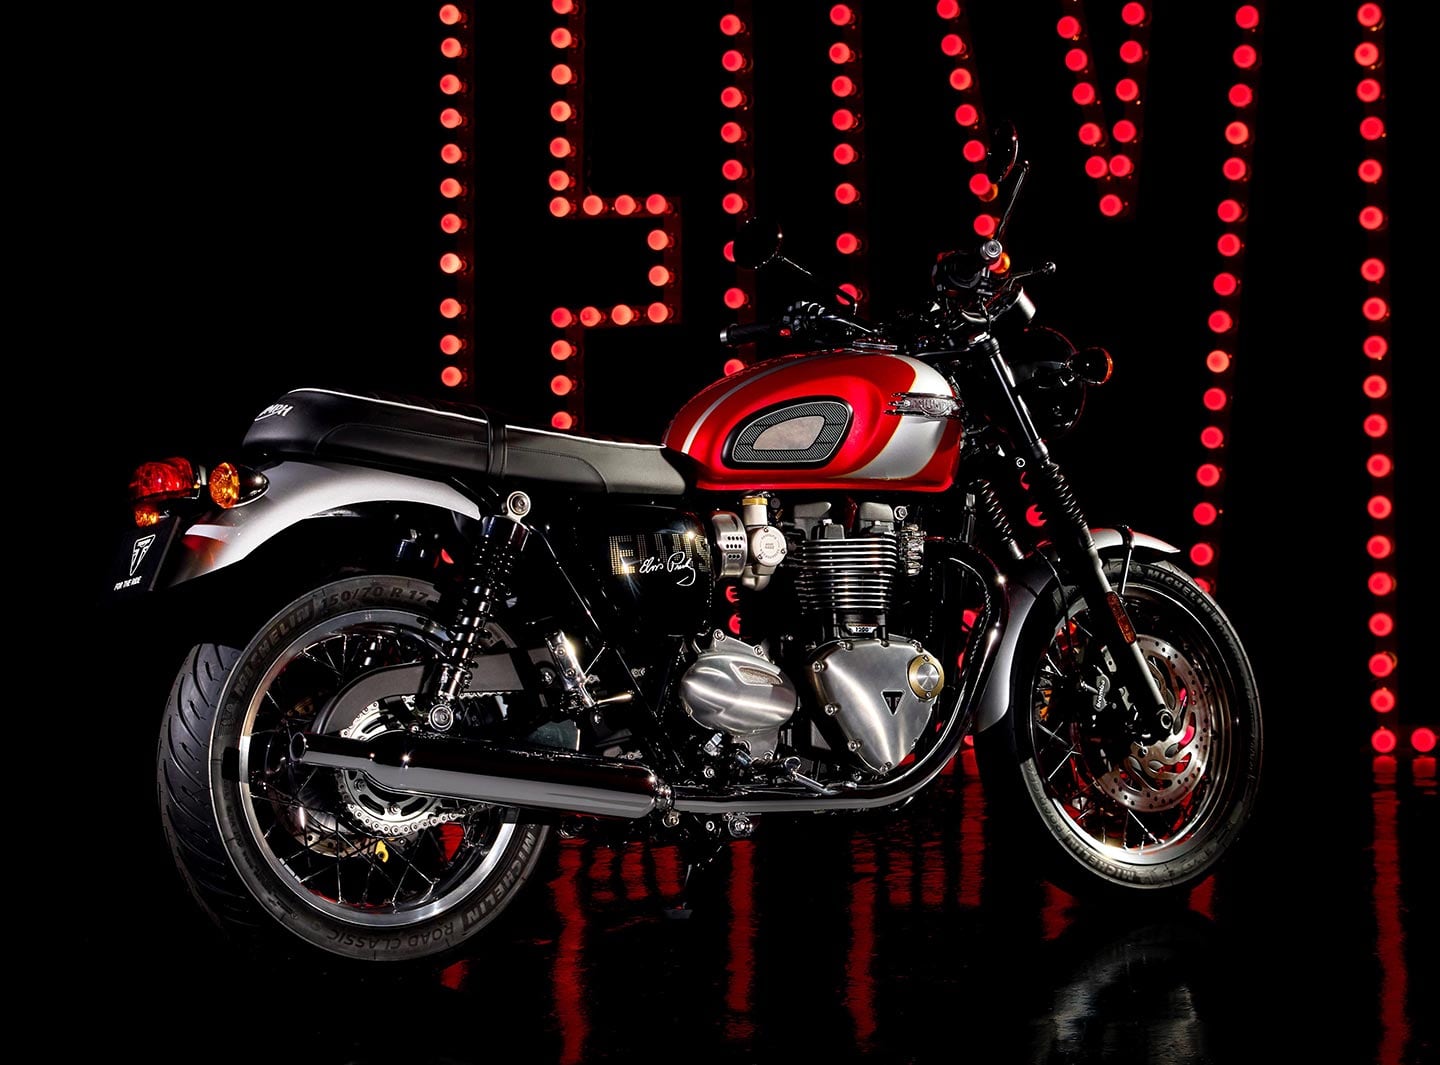 High-quality chrome finishes on the exhaust add a rich, premium touch to the Elvis bikes.